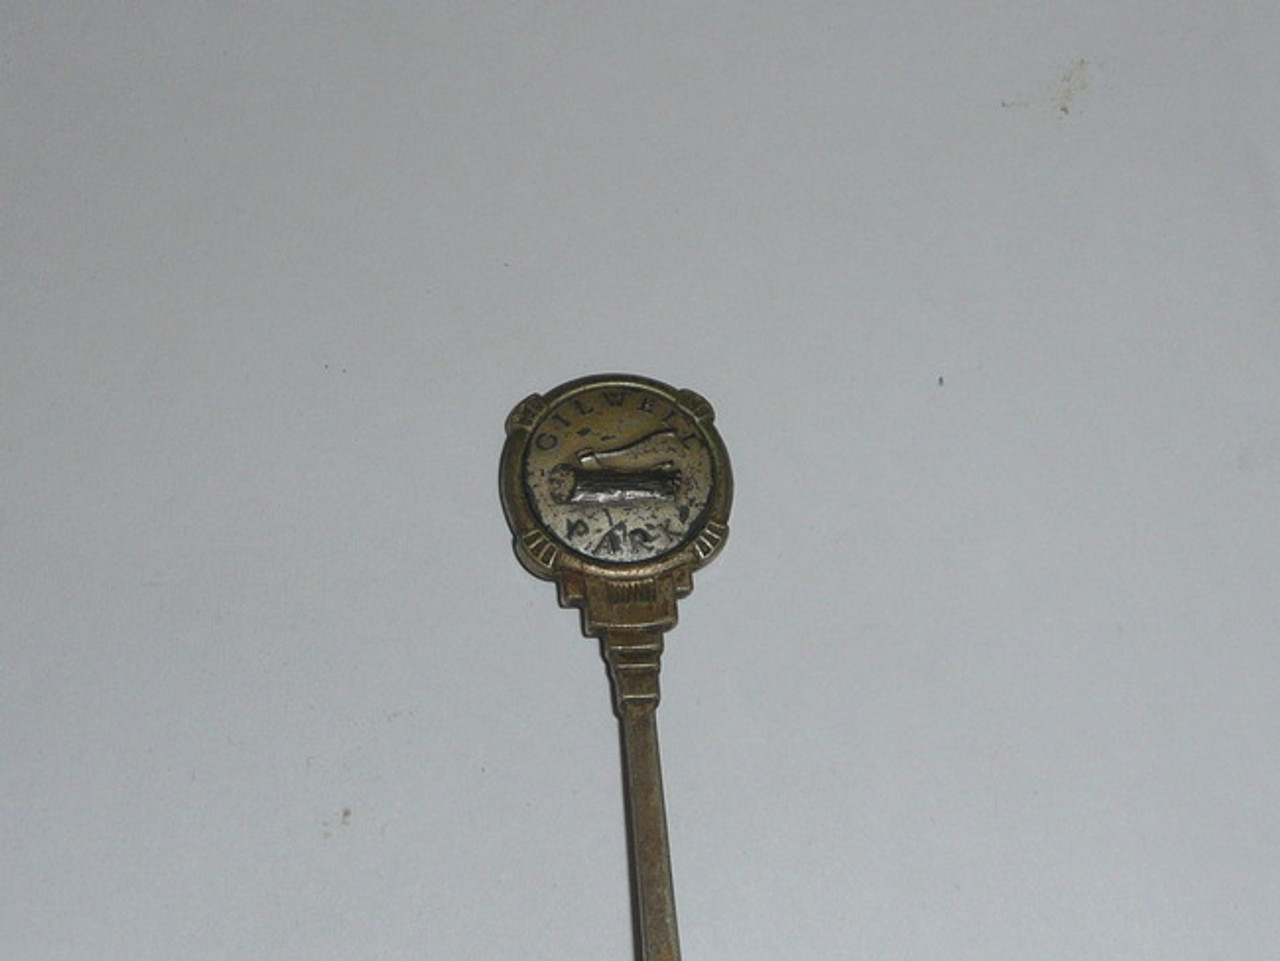 Gilwell Park Spoon, very old